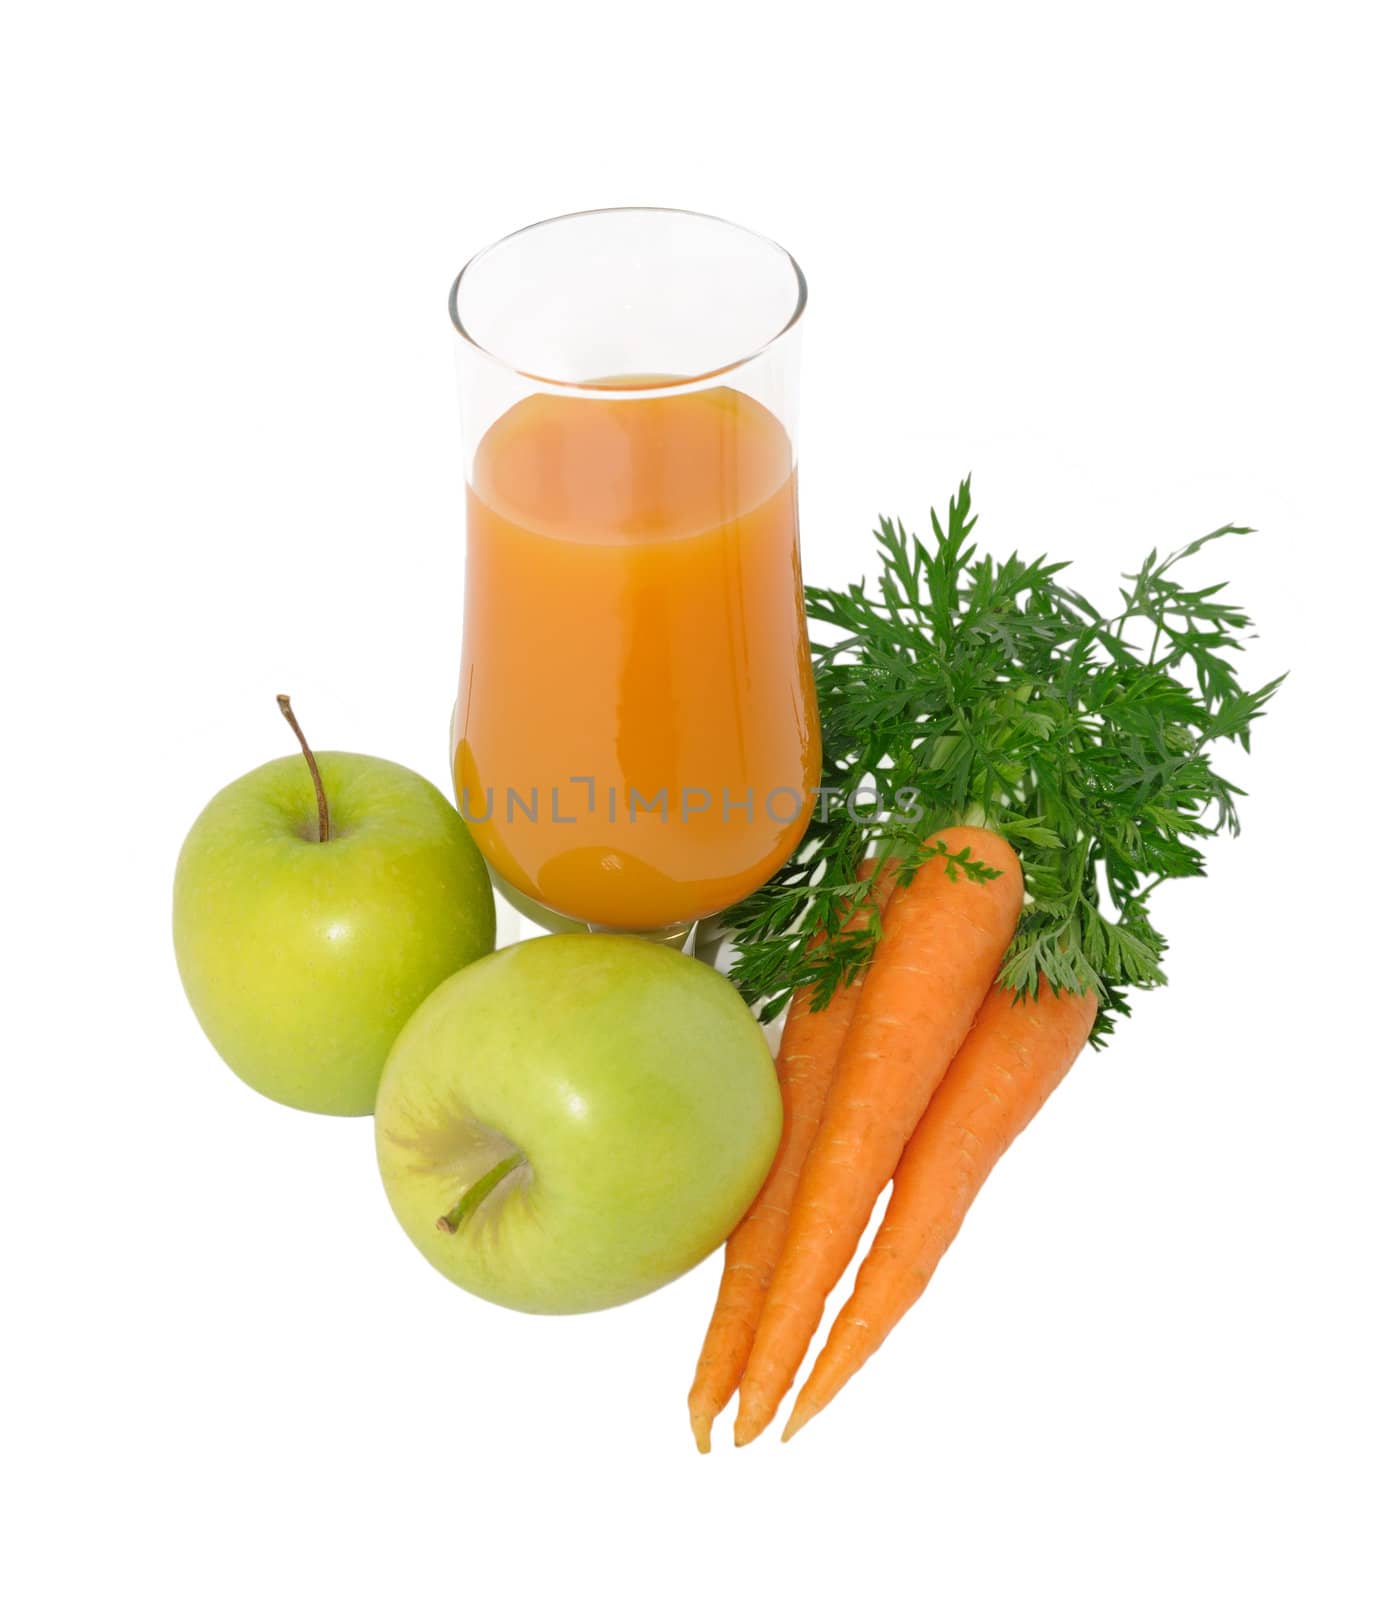 Carrot juice with apples and carrots by Apolonia